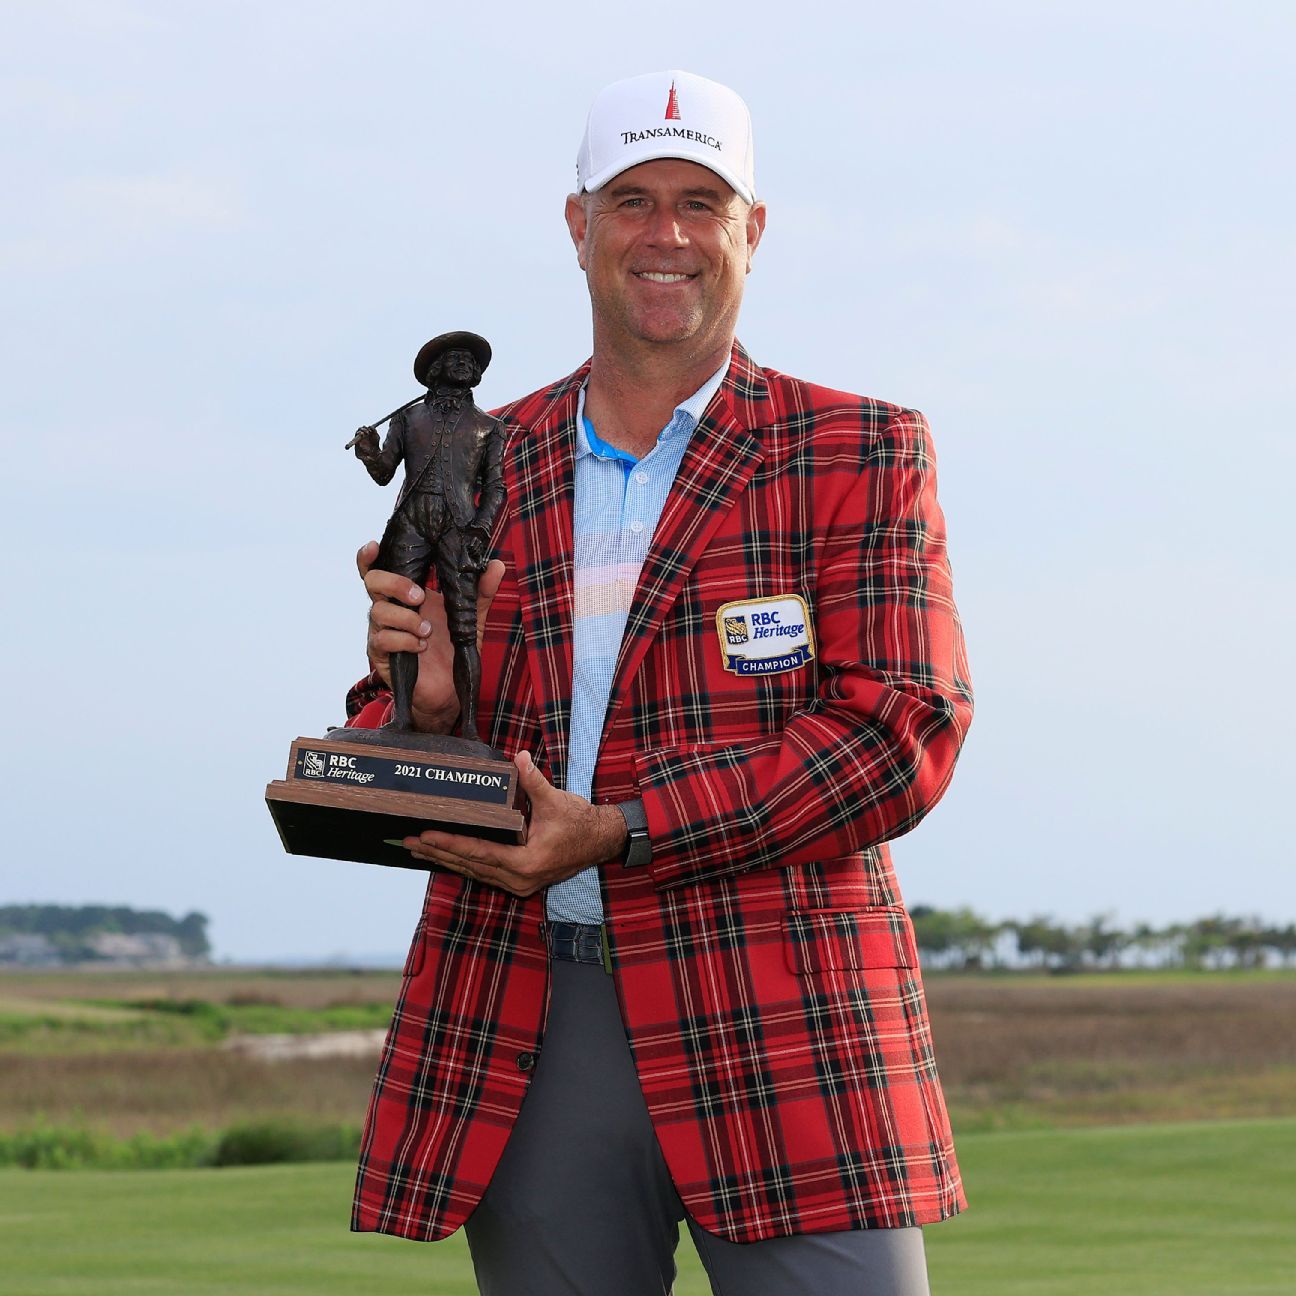 Stewart Cink leaves the record week with his third RBC Heritage title